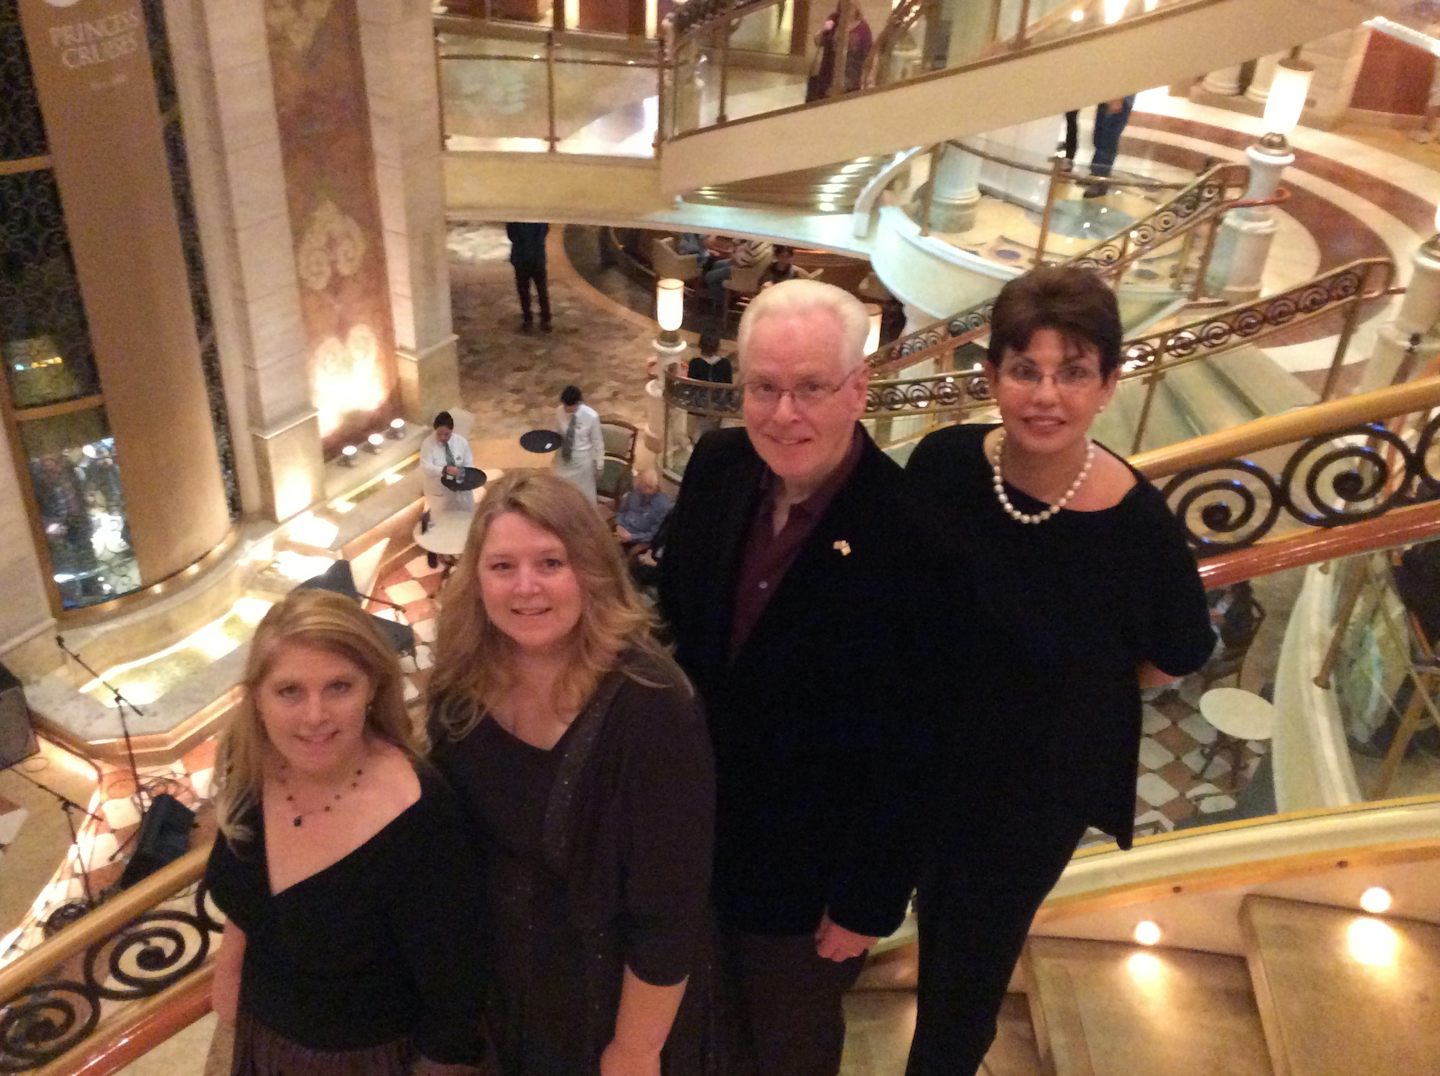 Family photo on center pavilion stairs. Beautiful ship!